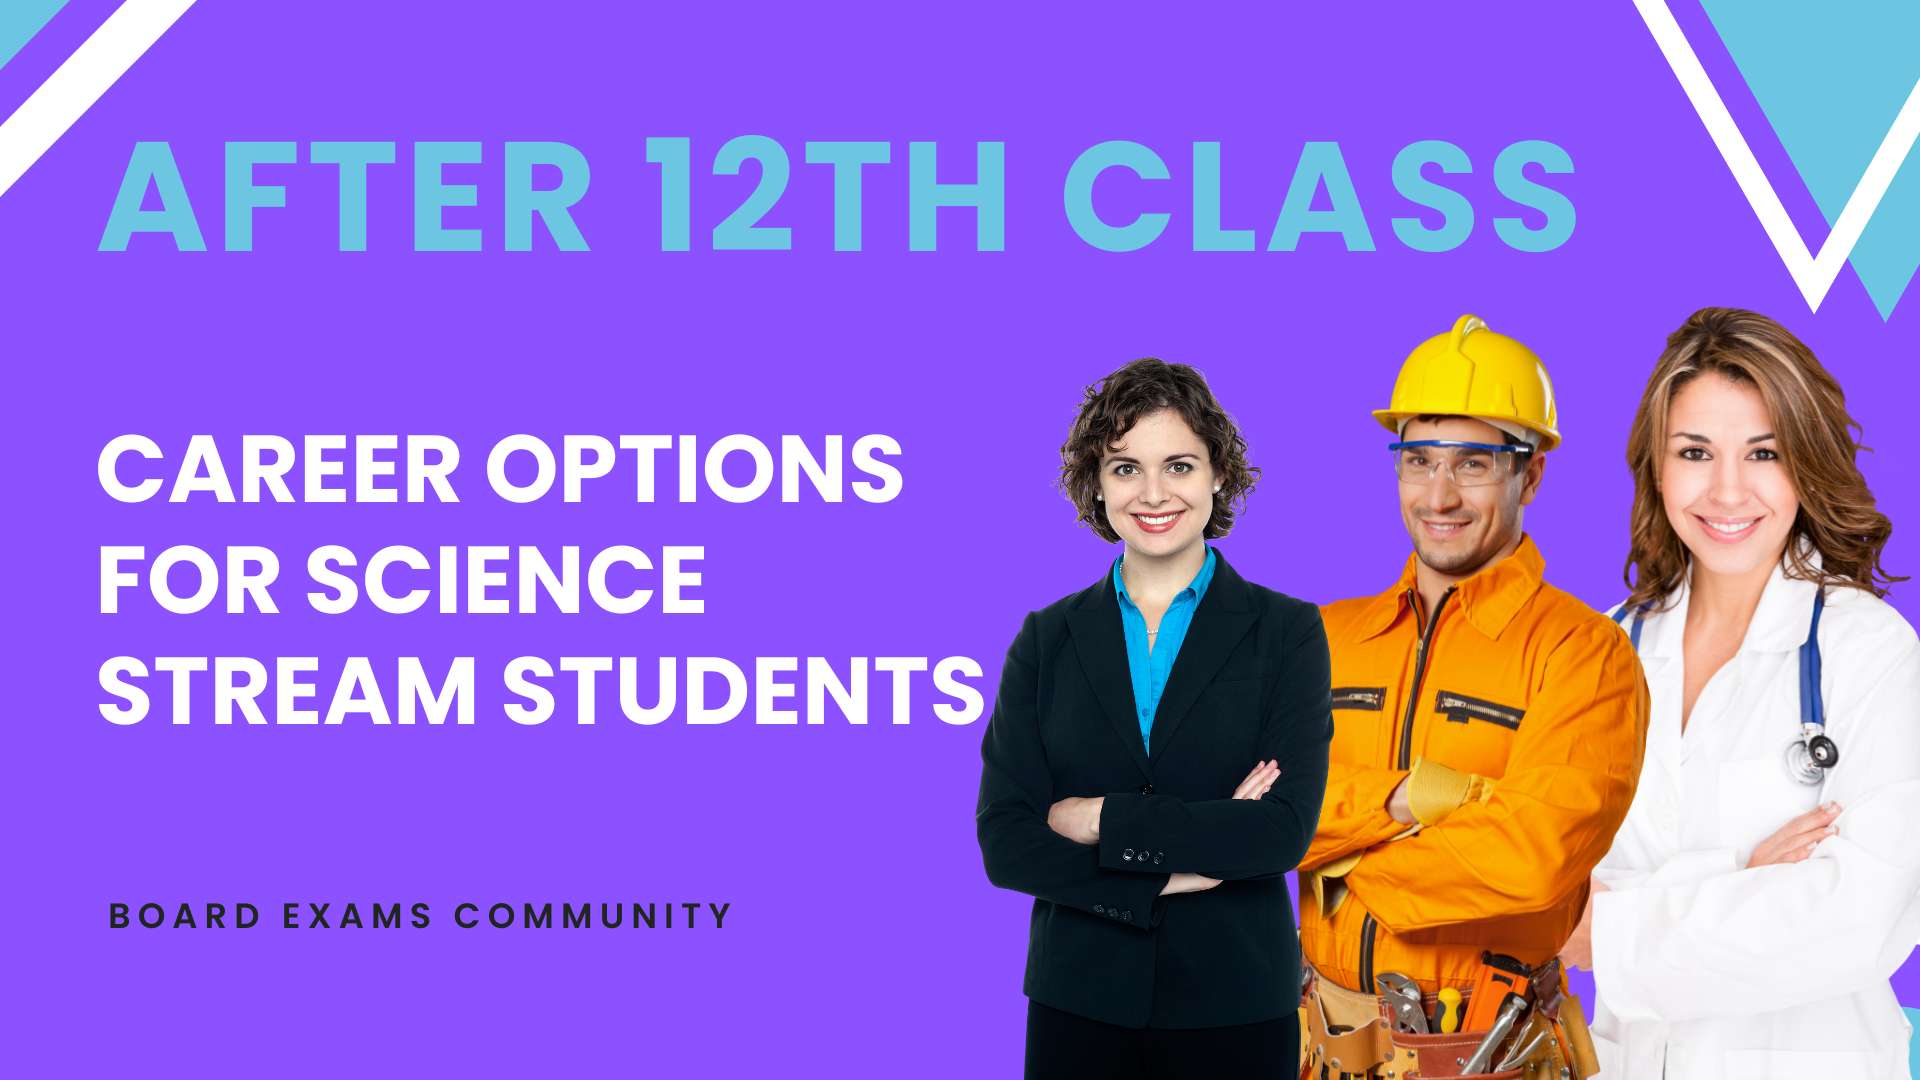 Career Options After 12th Class for Science Stream Students